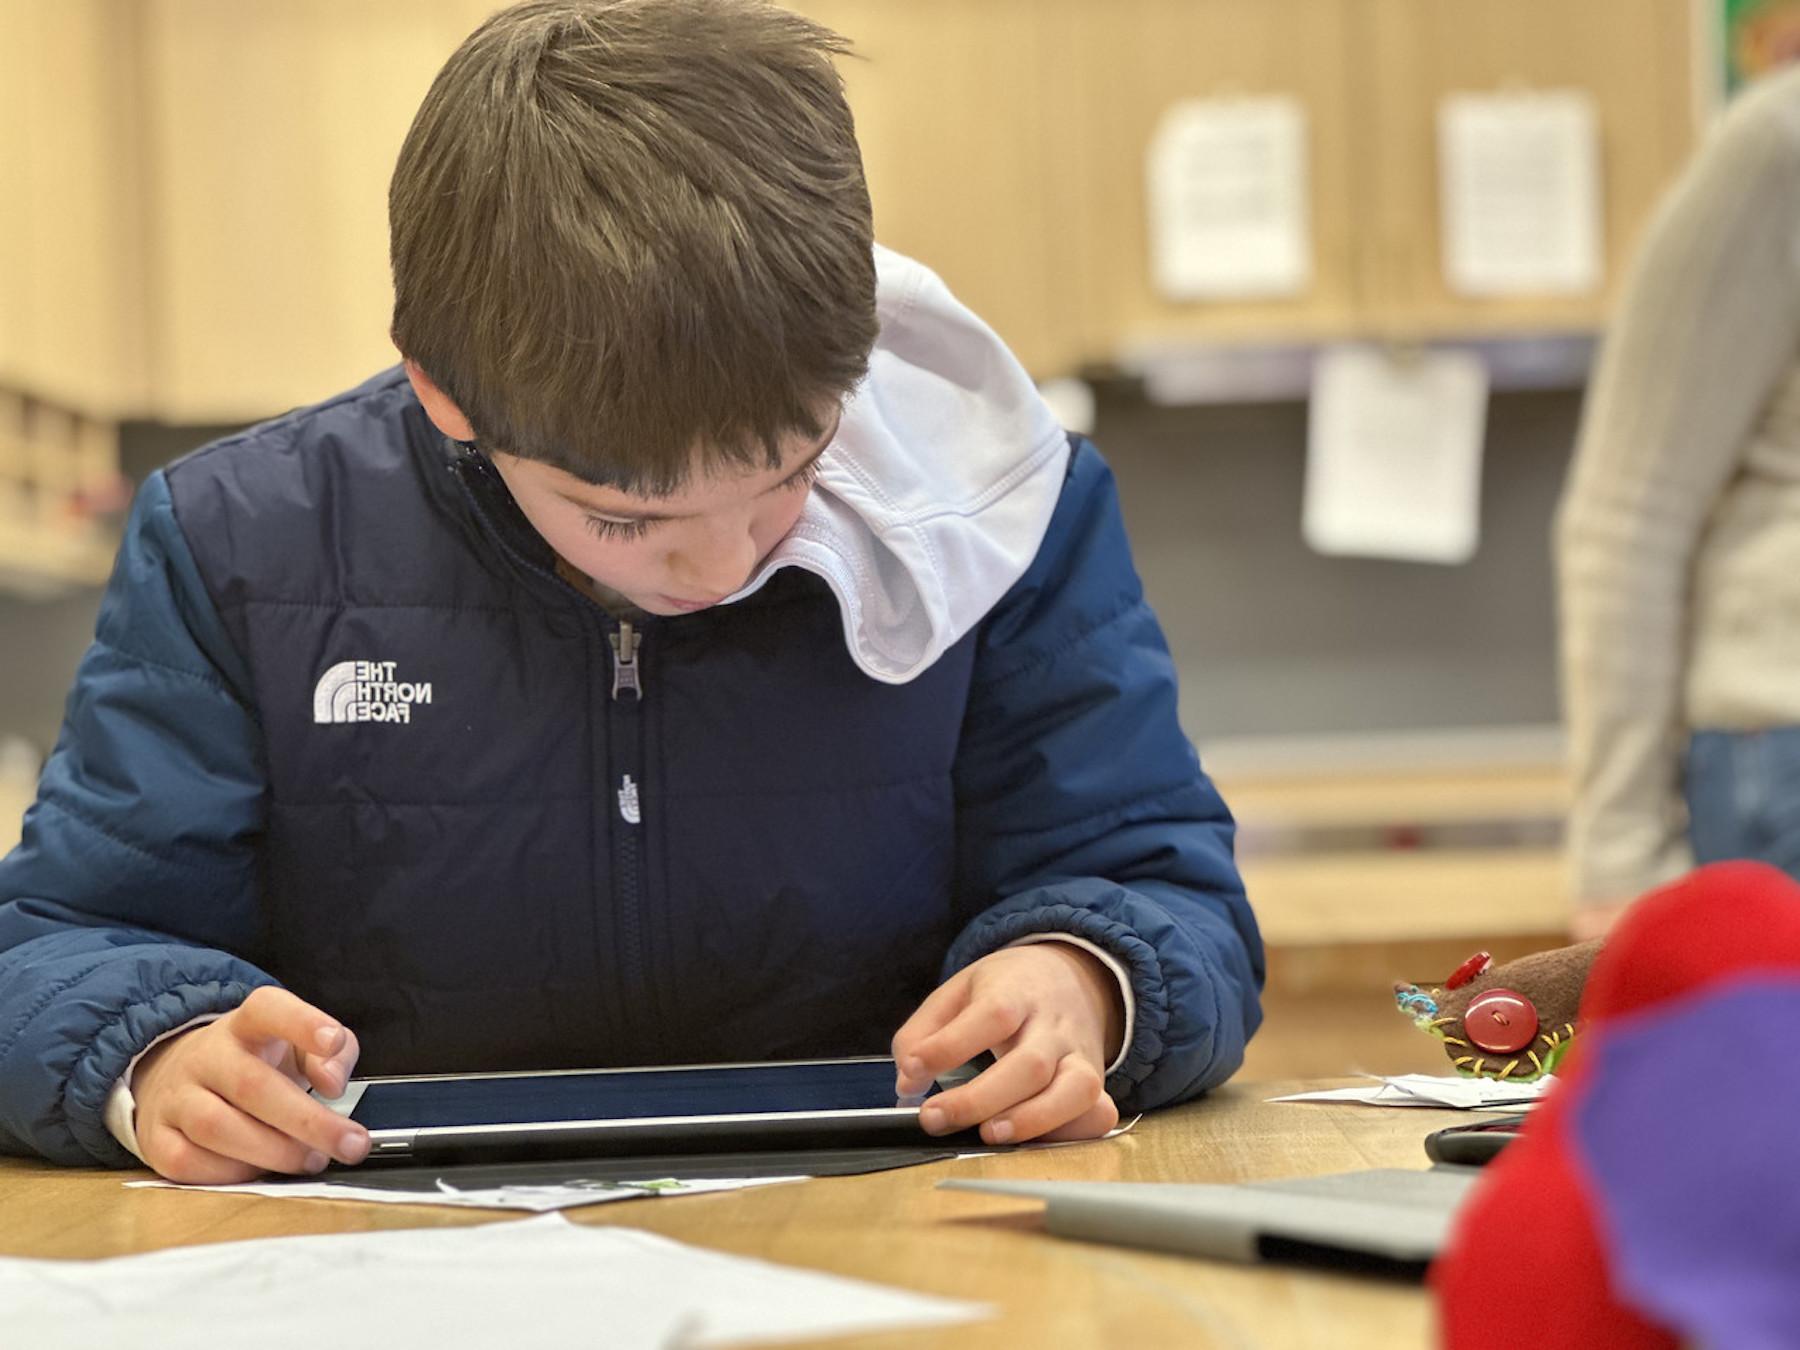 Fieldston Lower student works on his iPad in classroom.